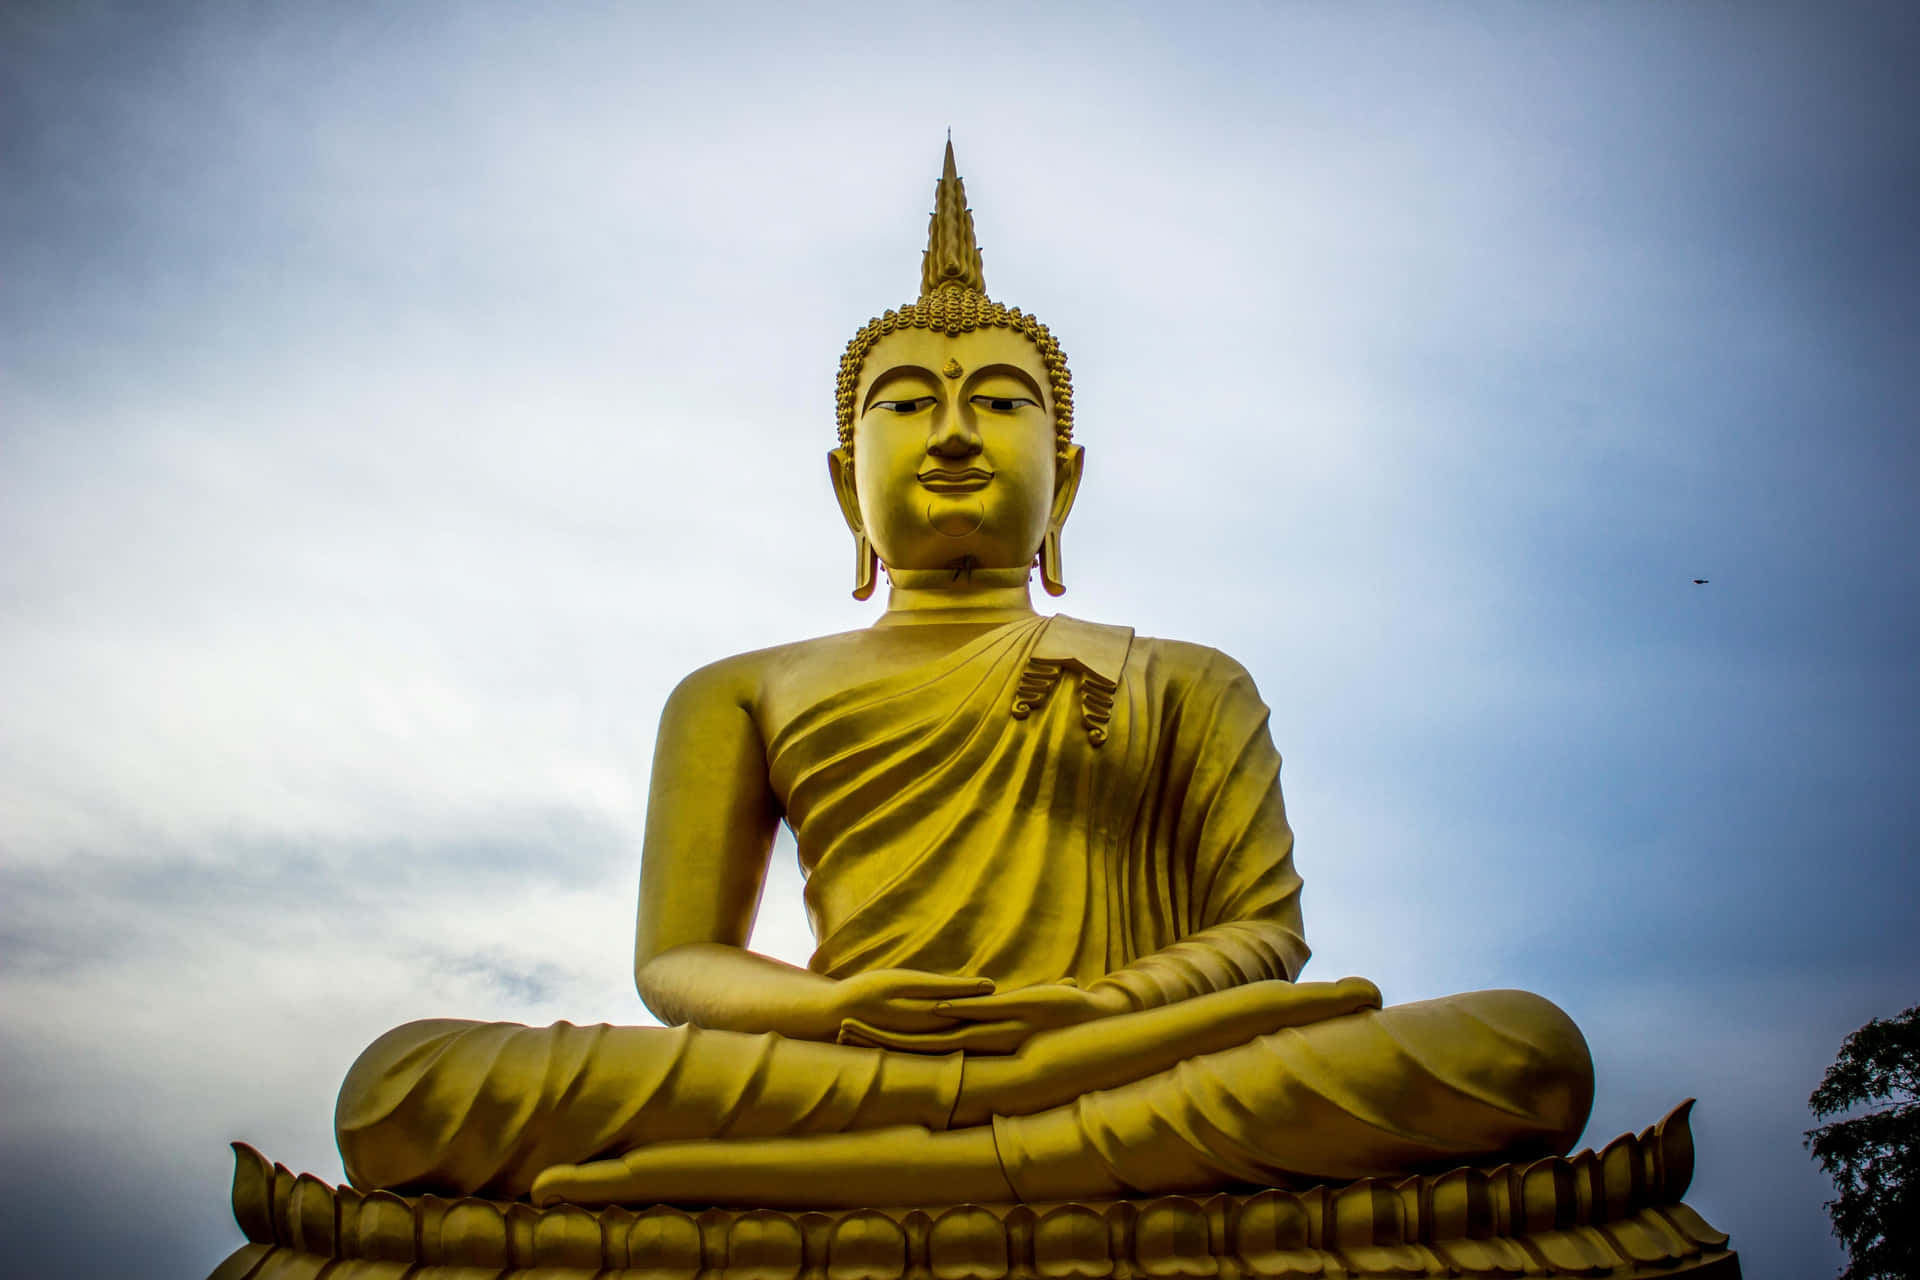 A Golden Buddha Statue Is Sitting In Front Of A Cloudy Sky